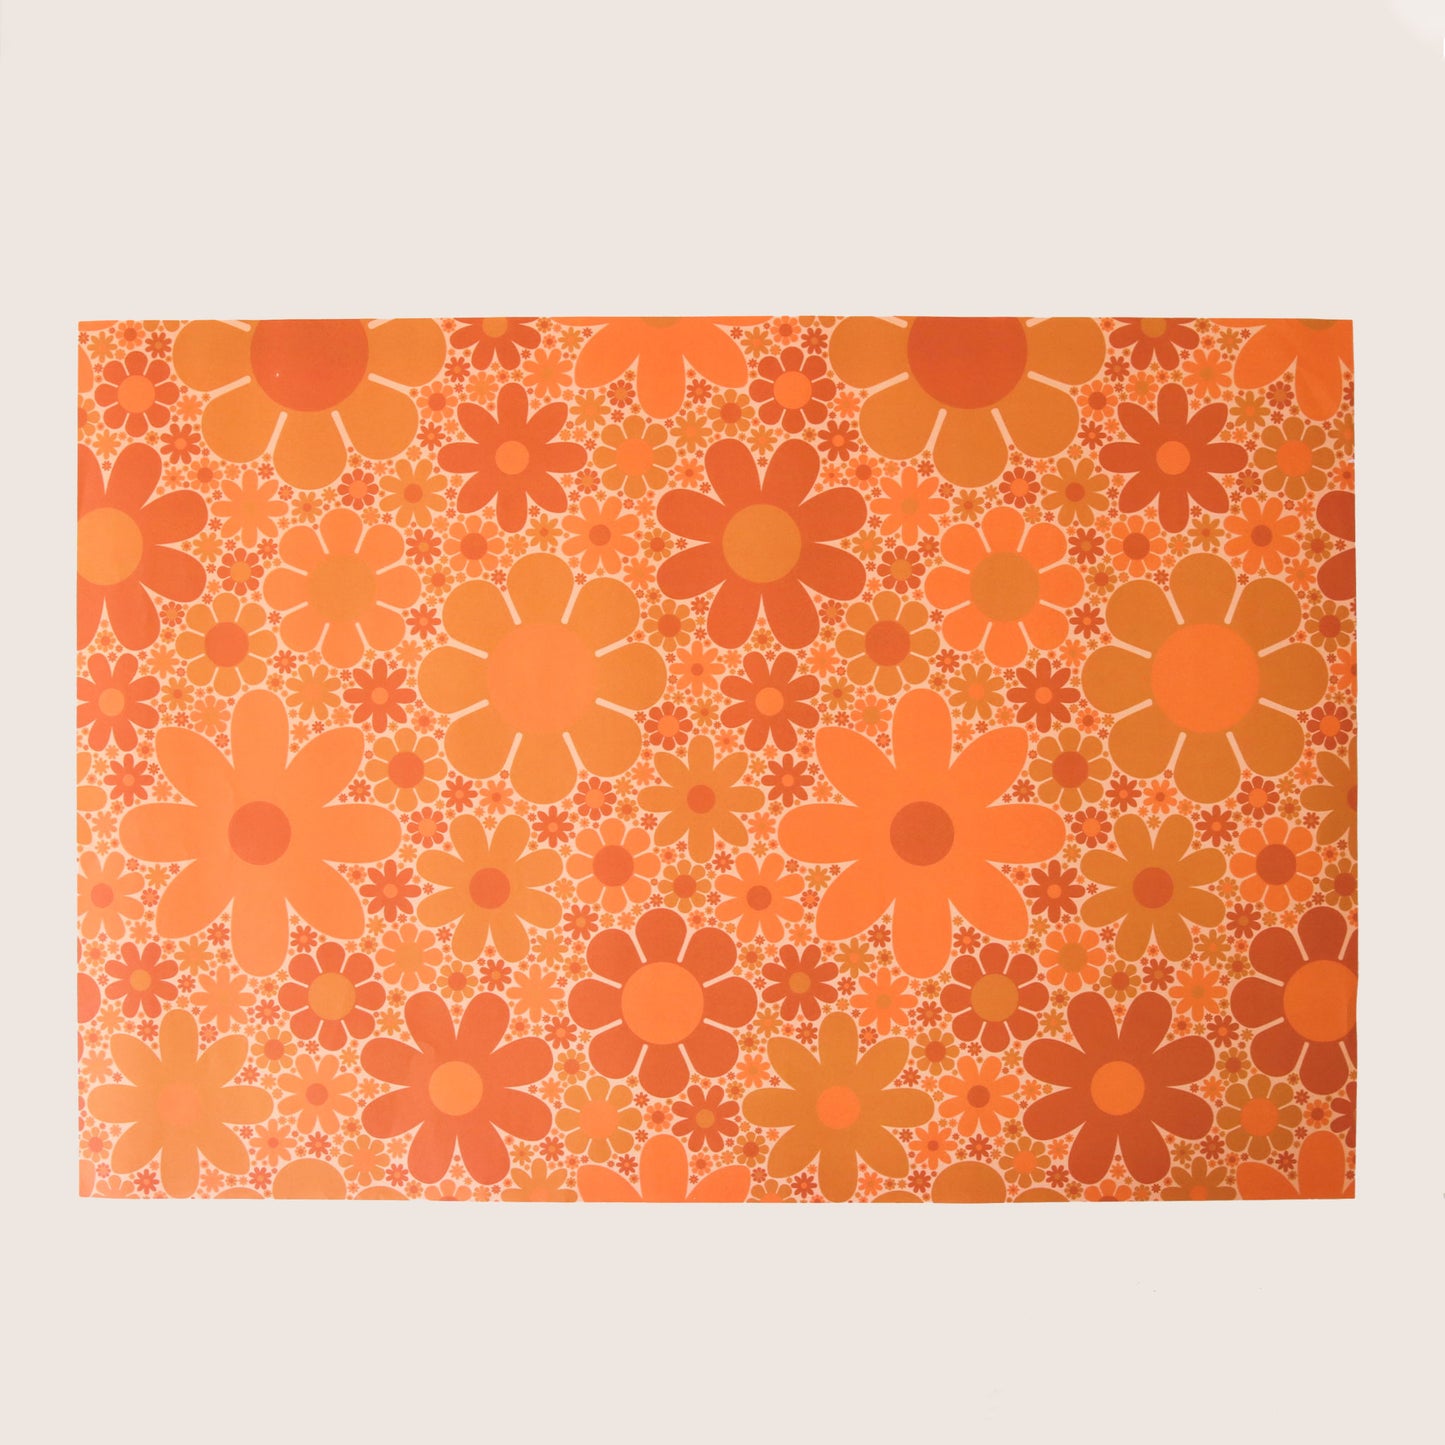 Sheet of wrapping paper filled with orange and yellow flowers of various shapes and sizes.